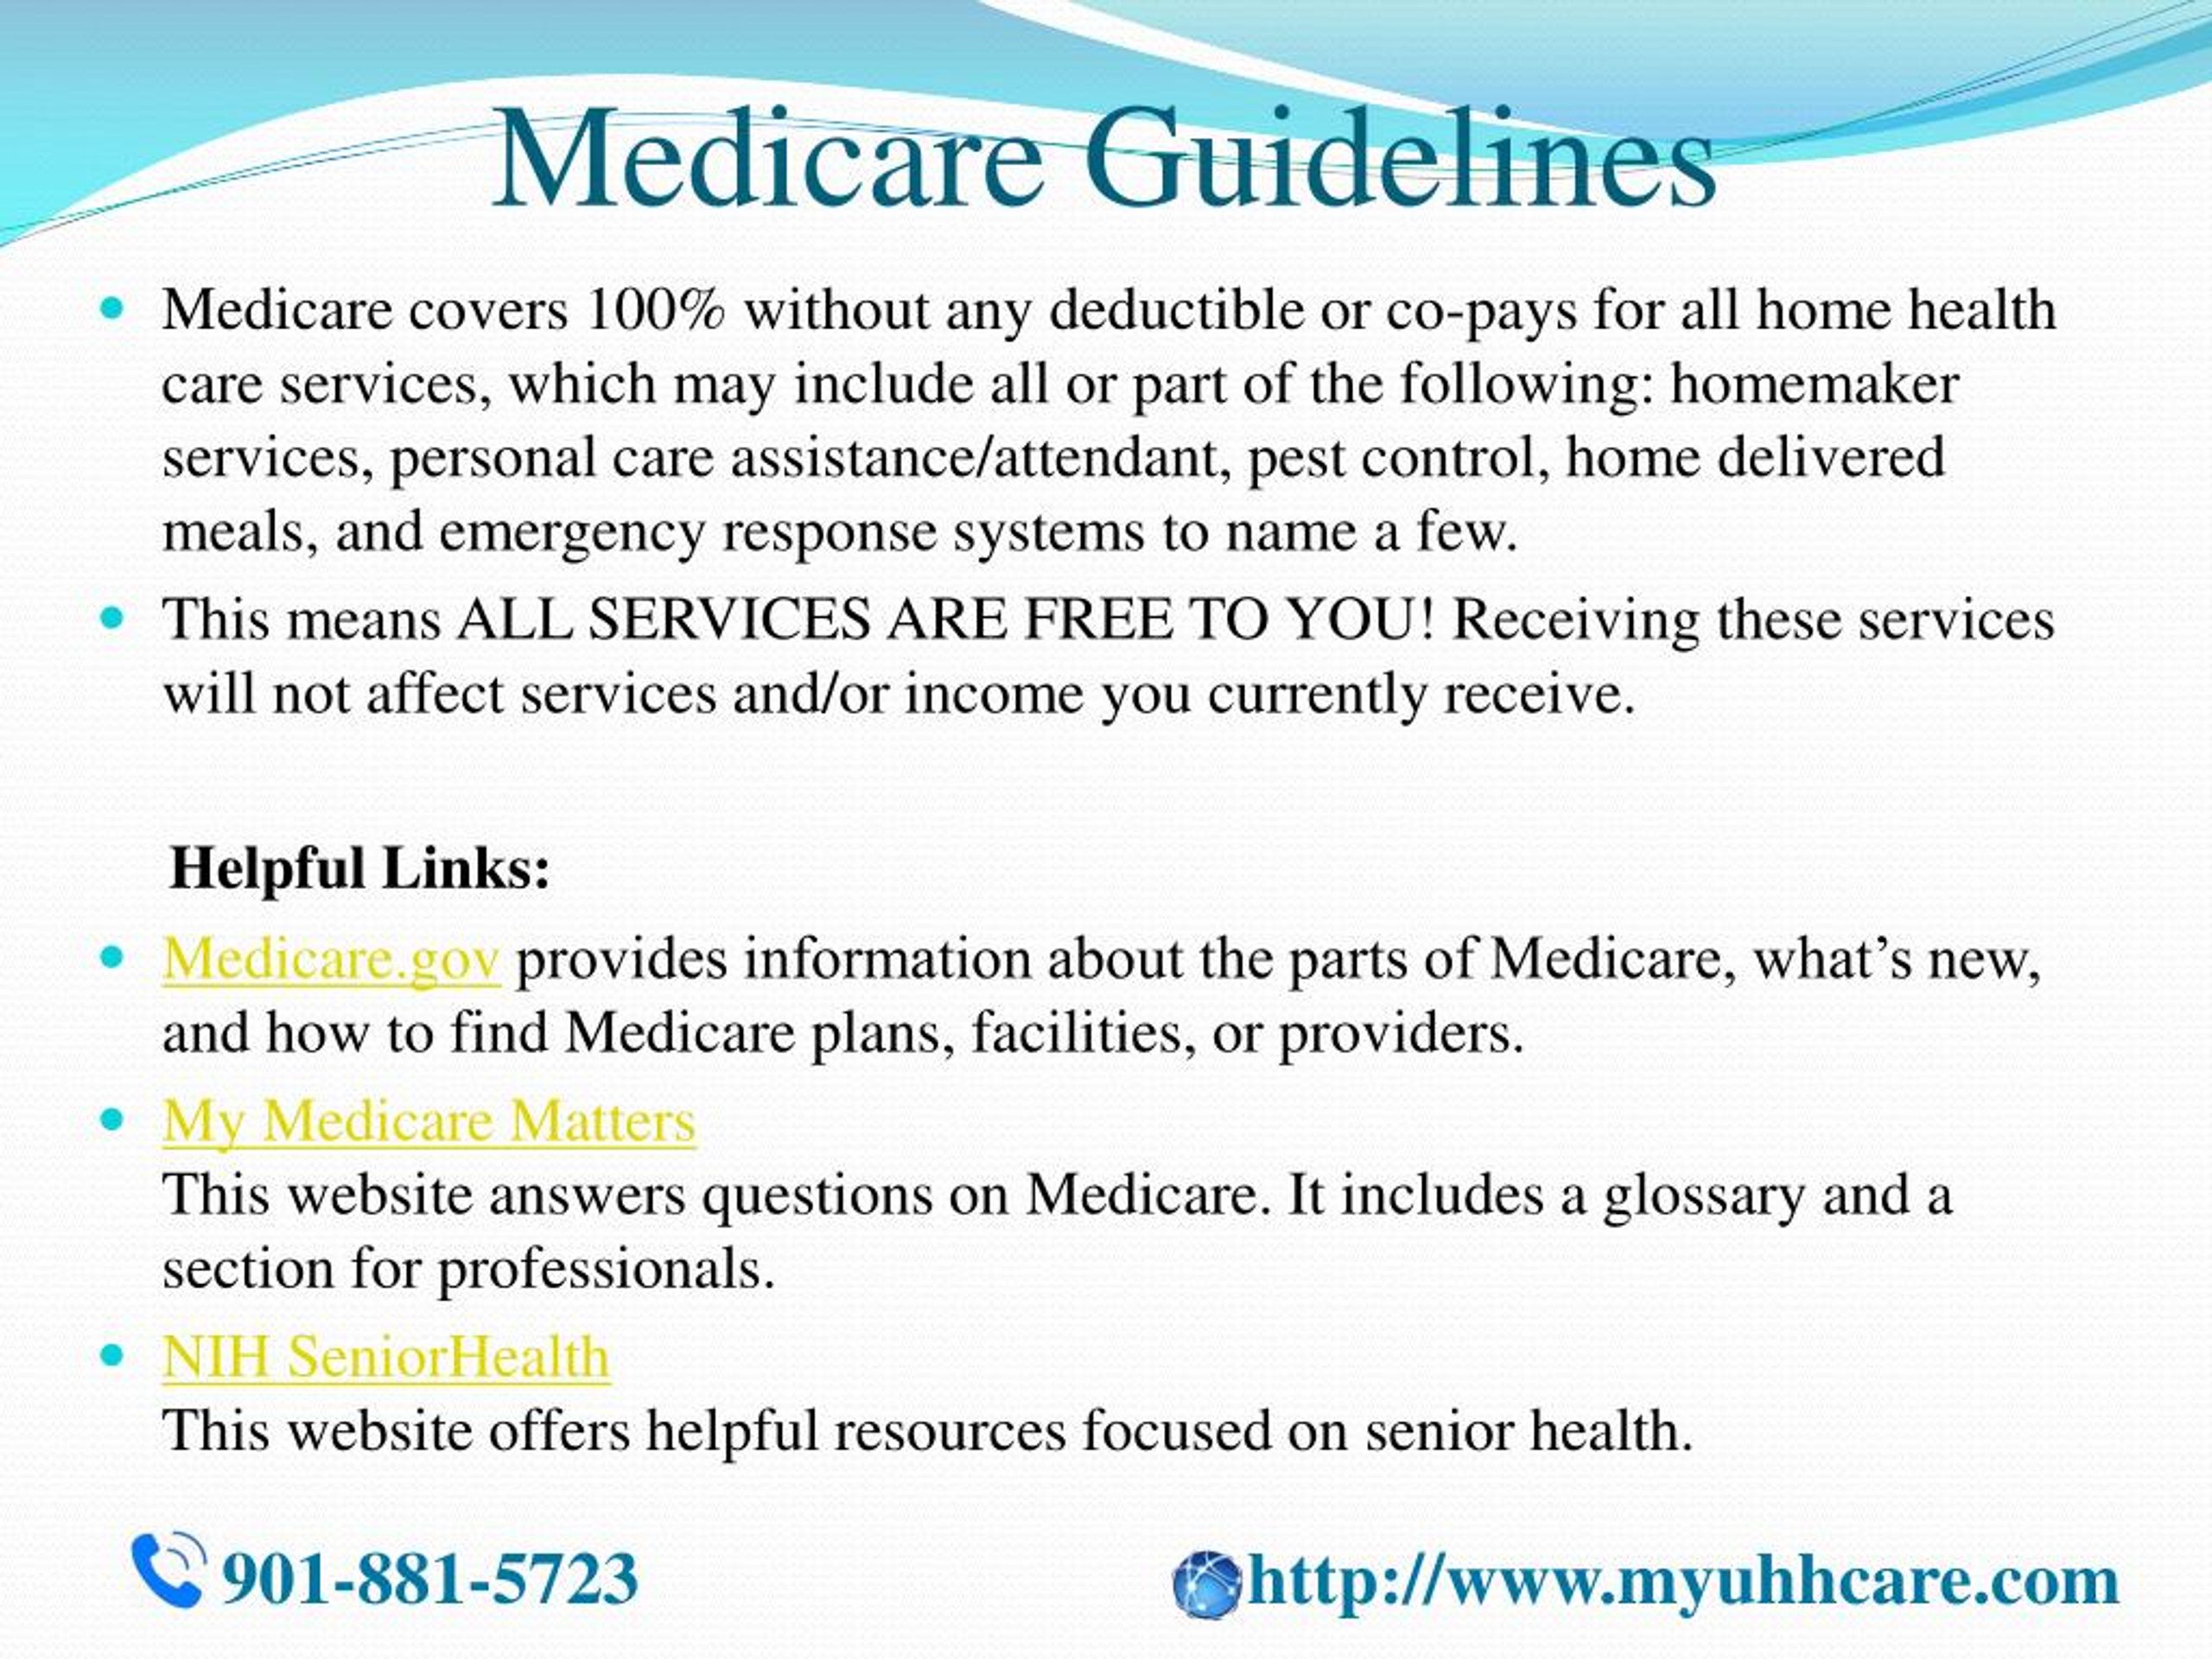 PPT Home Health Care Services PowerPoint Presentation, free download